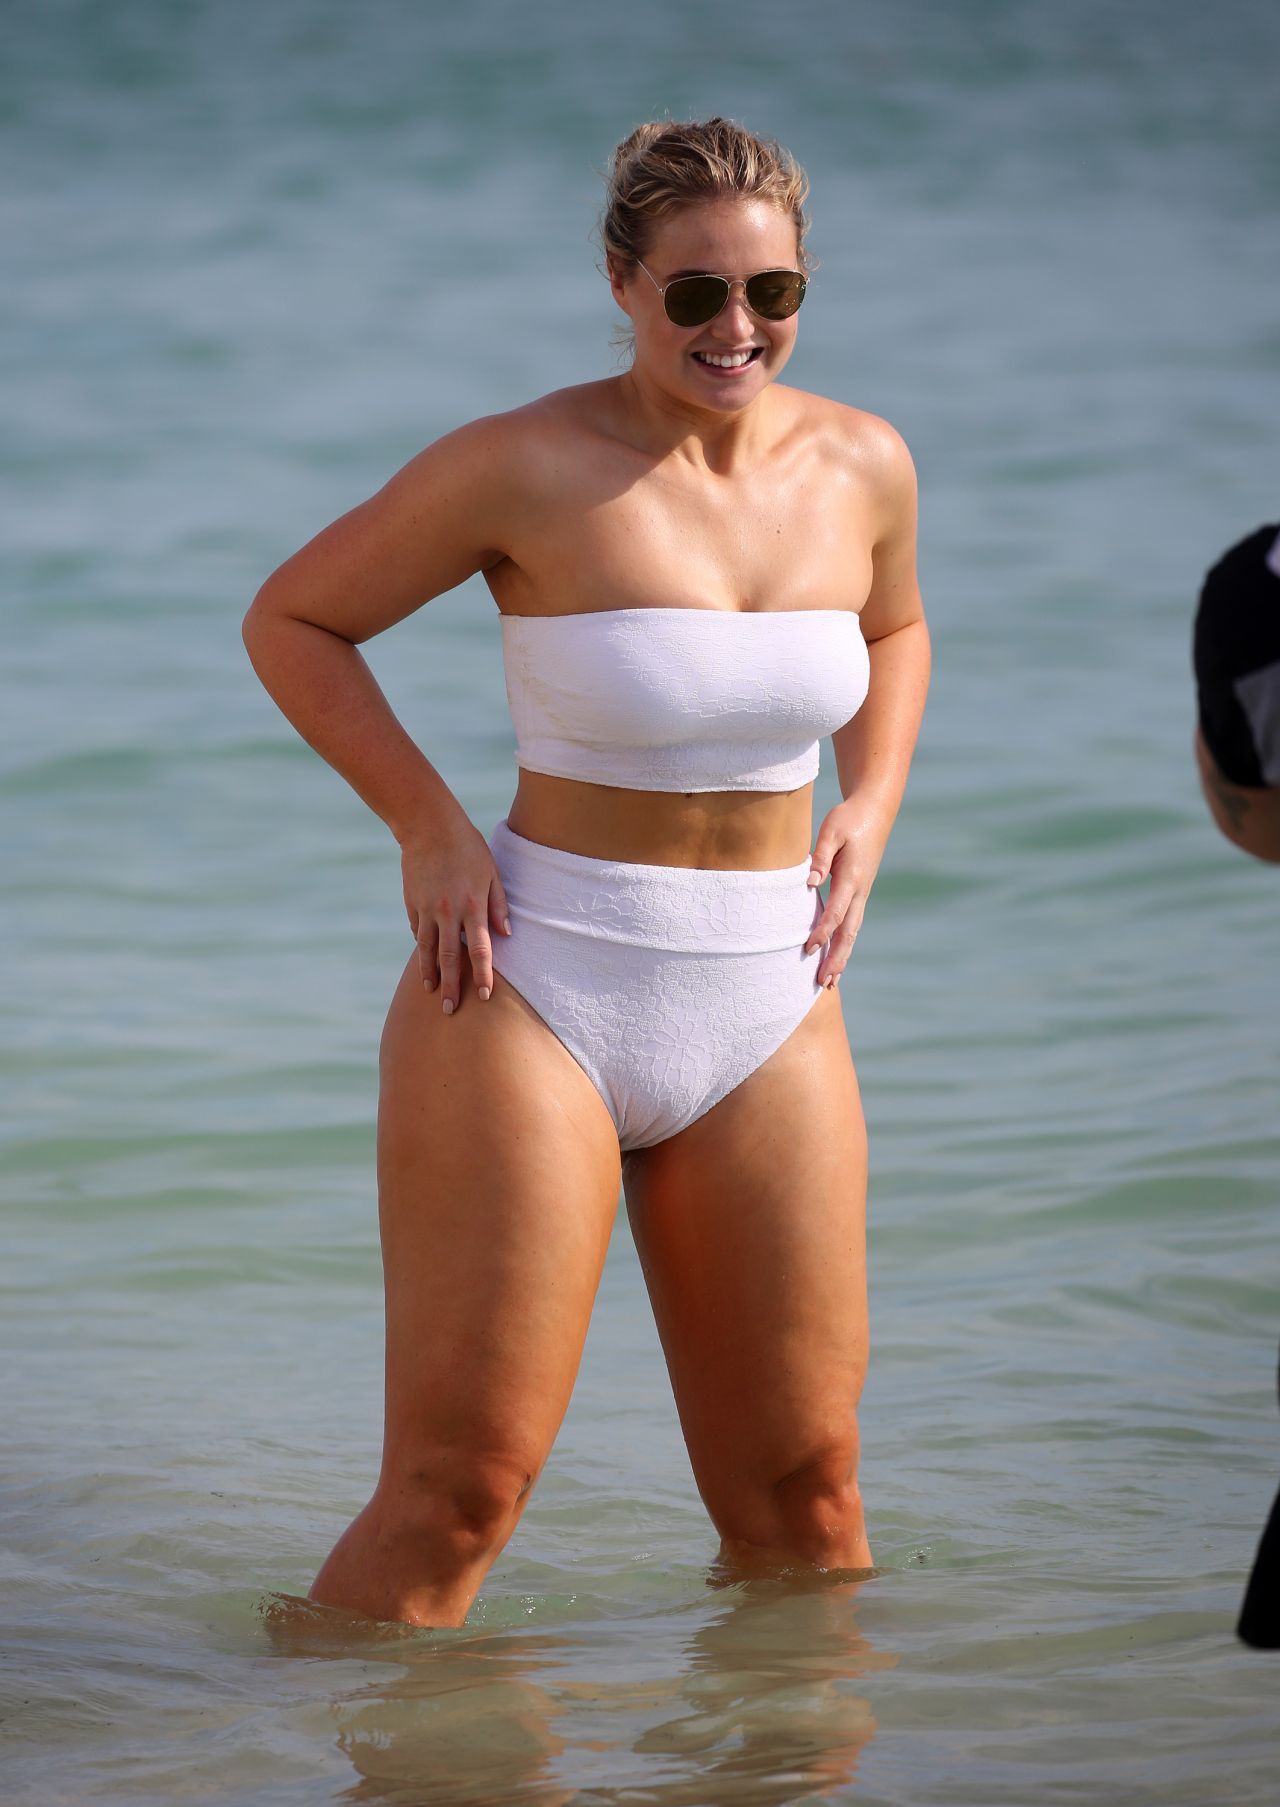 Iskra Lawrence in Different Bikinis and Swimsuits Photoshoot for Aerie, Mia...